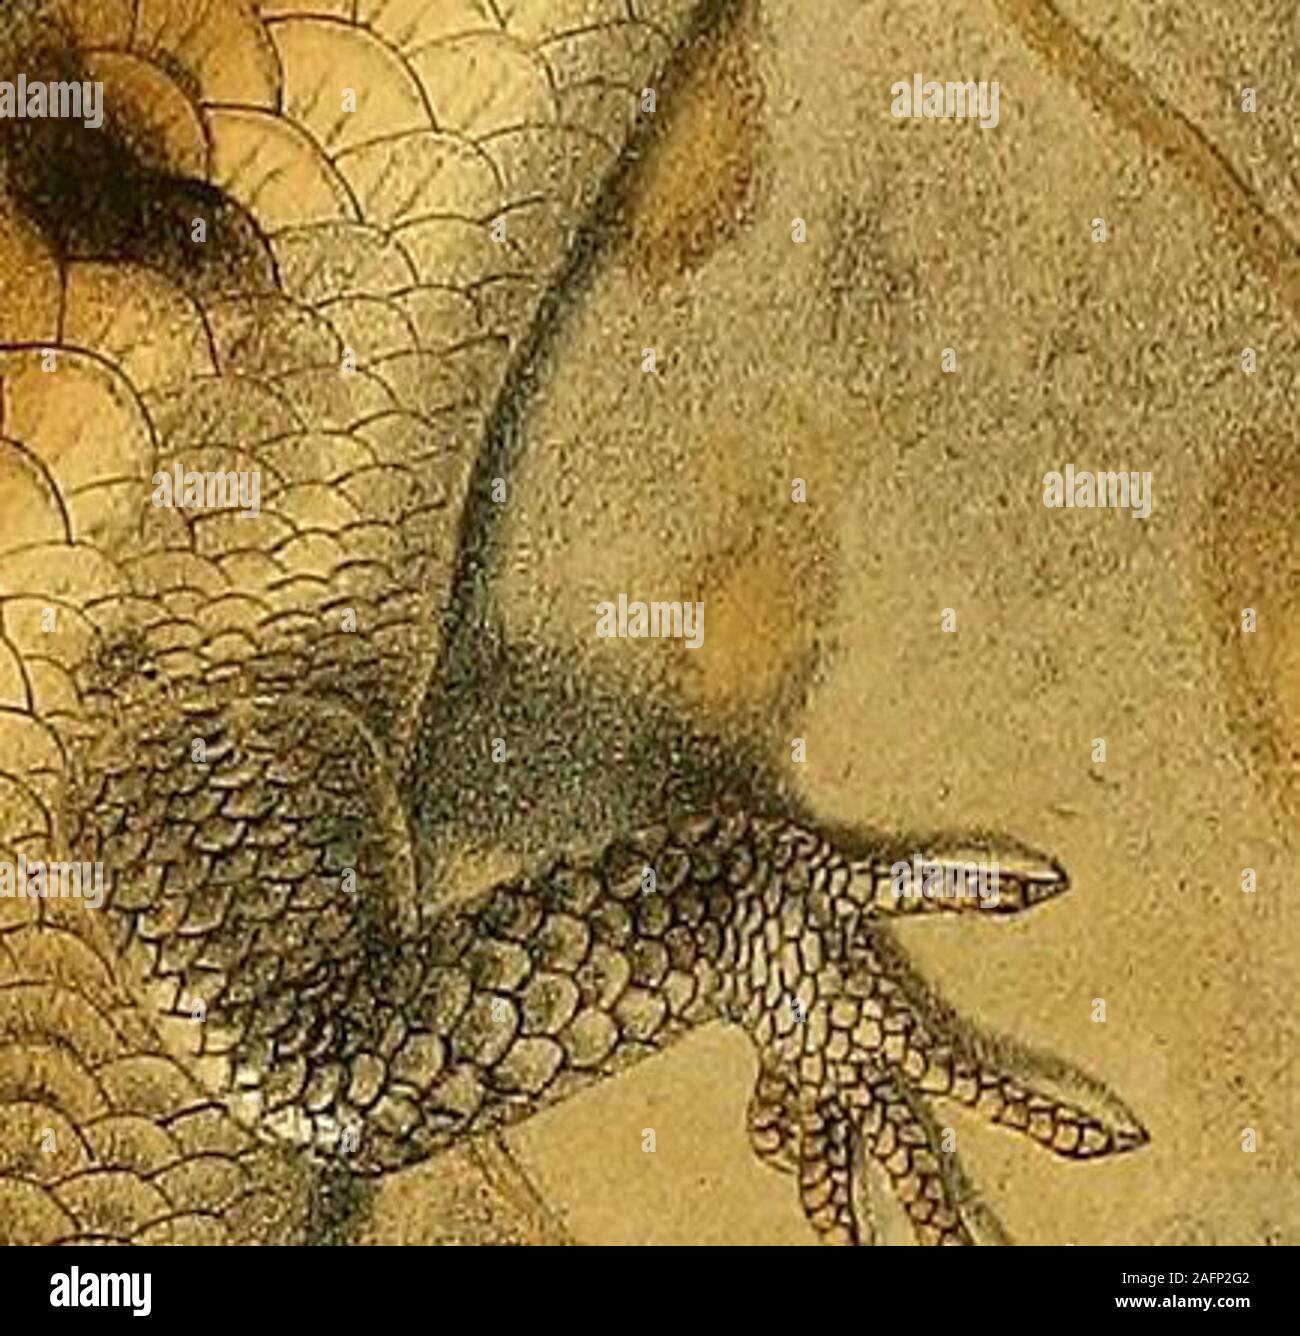 . Zoology of Egypt. resembles that of the members of the genusEumeces and not that of Scincus. The moderately pointed snout arches gentlyupwards to the vertex and is quite distinct from the flattened digging snout of thelatter genus. Its digits, moreover, are structurally different from those of Scincus, inwhich both the fingers and toes are much flattened from above downwards, so thattheir cross-section is an elongated oval, transverse in position, while the digits ofScincopus are slightly laterally compressed, and thus in transverse section present avertical oval. In Scincus, the digits are Stock Photo